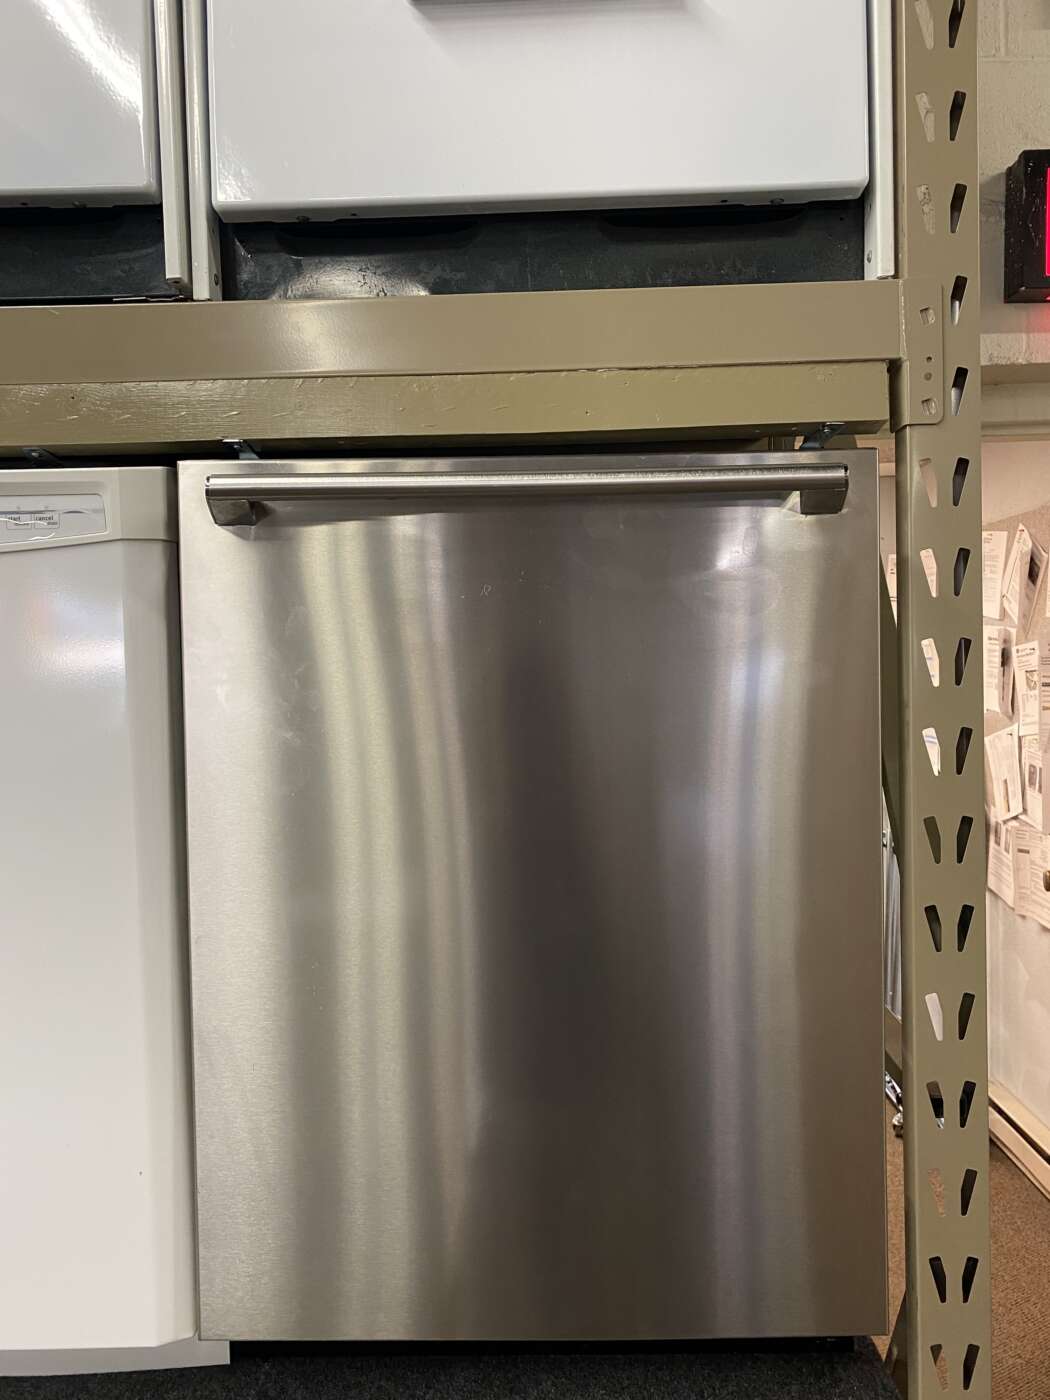 Electrolux Stainless Steel Dishwasher with 3rd Rack